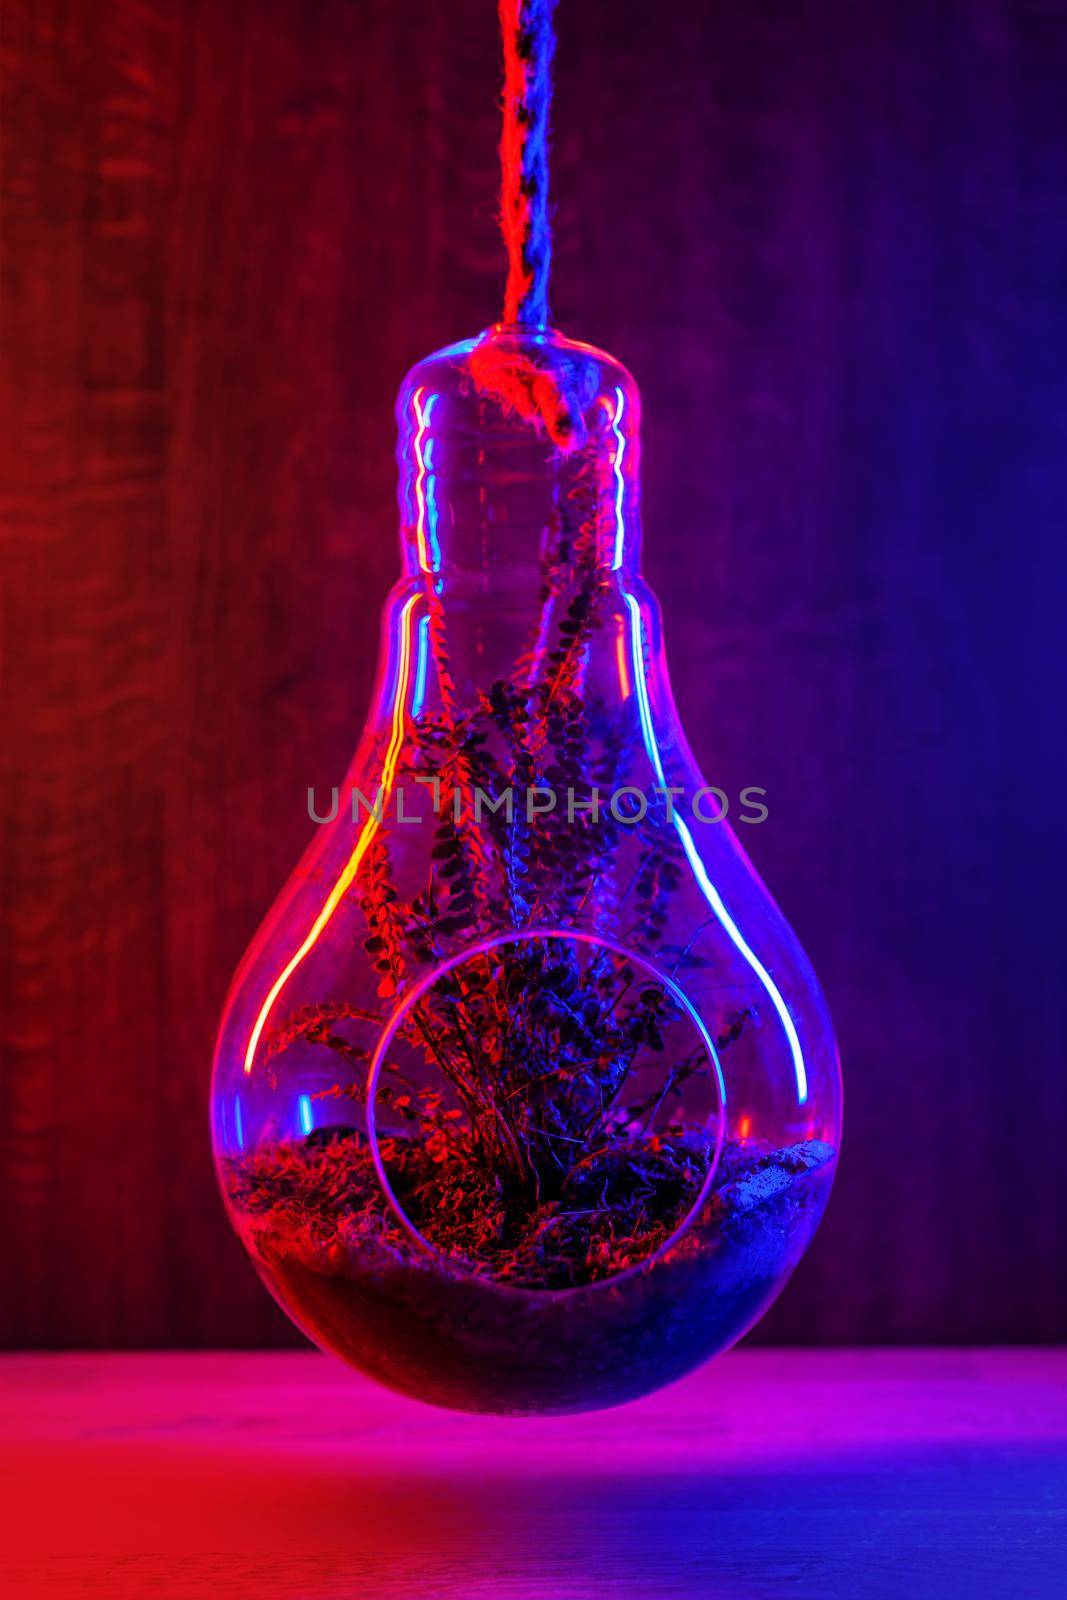 Boston fern plant growing in glass air fern holder terrarium on dark pink background. Illuminated in red and blue.